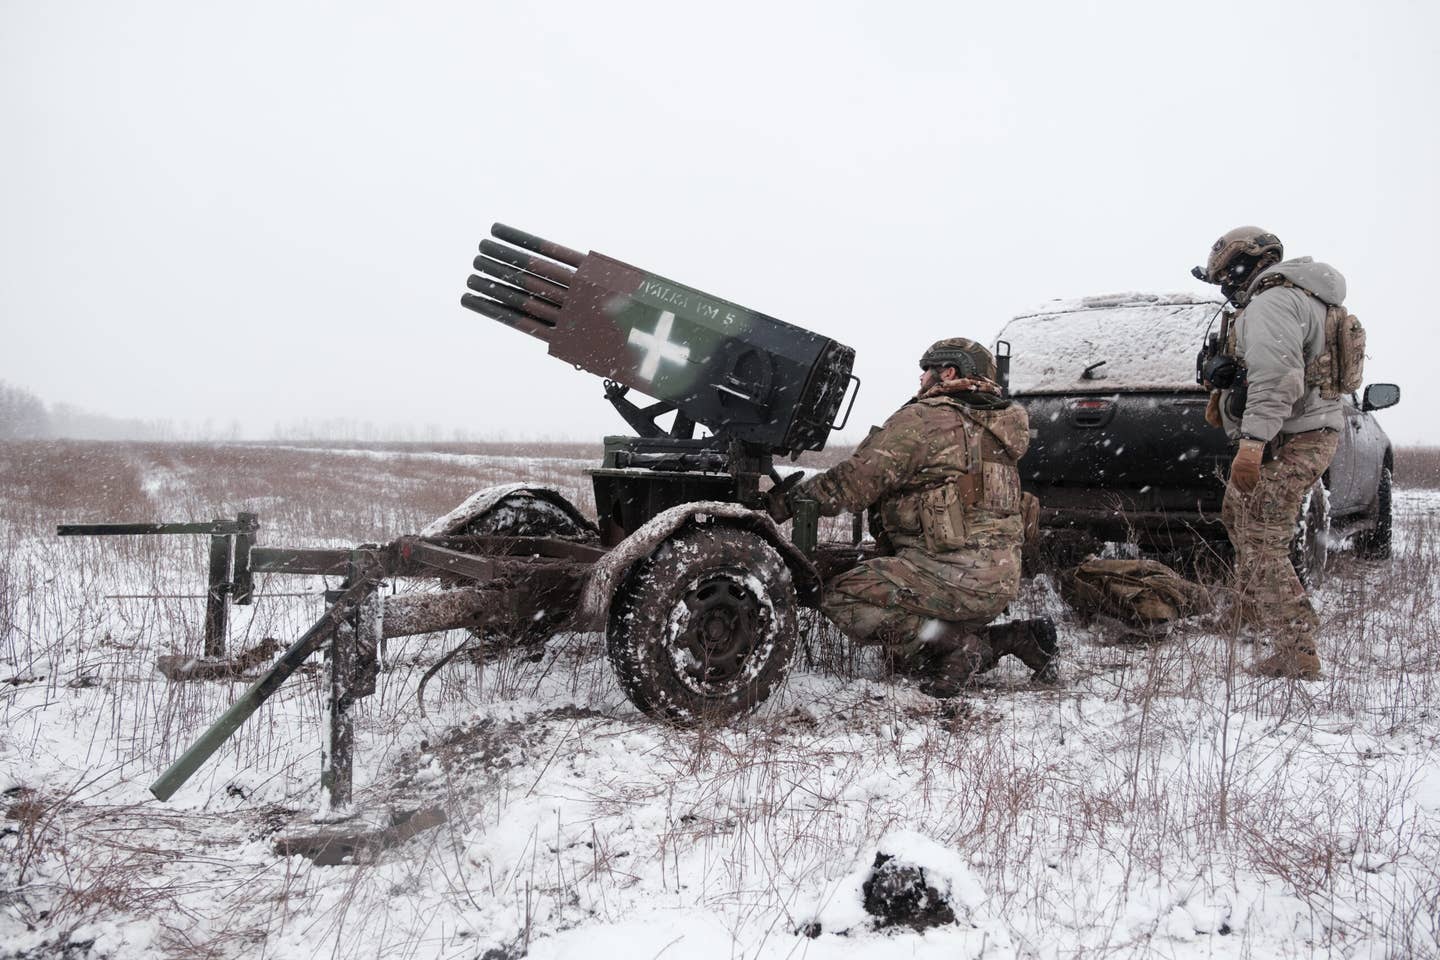 Ukrainian soldiers of the 28th Mechanized Brigade prepare an improvised multiple rocket launcher for firing on a Russian position on December 25, 2023, in the Donetsk region, Ukraine. <em>Photo by Vitalii Nosach/Global Images Ukraine via Getty Images</em>